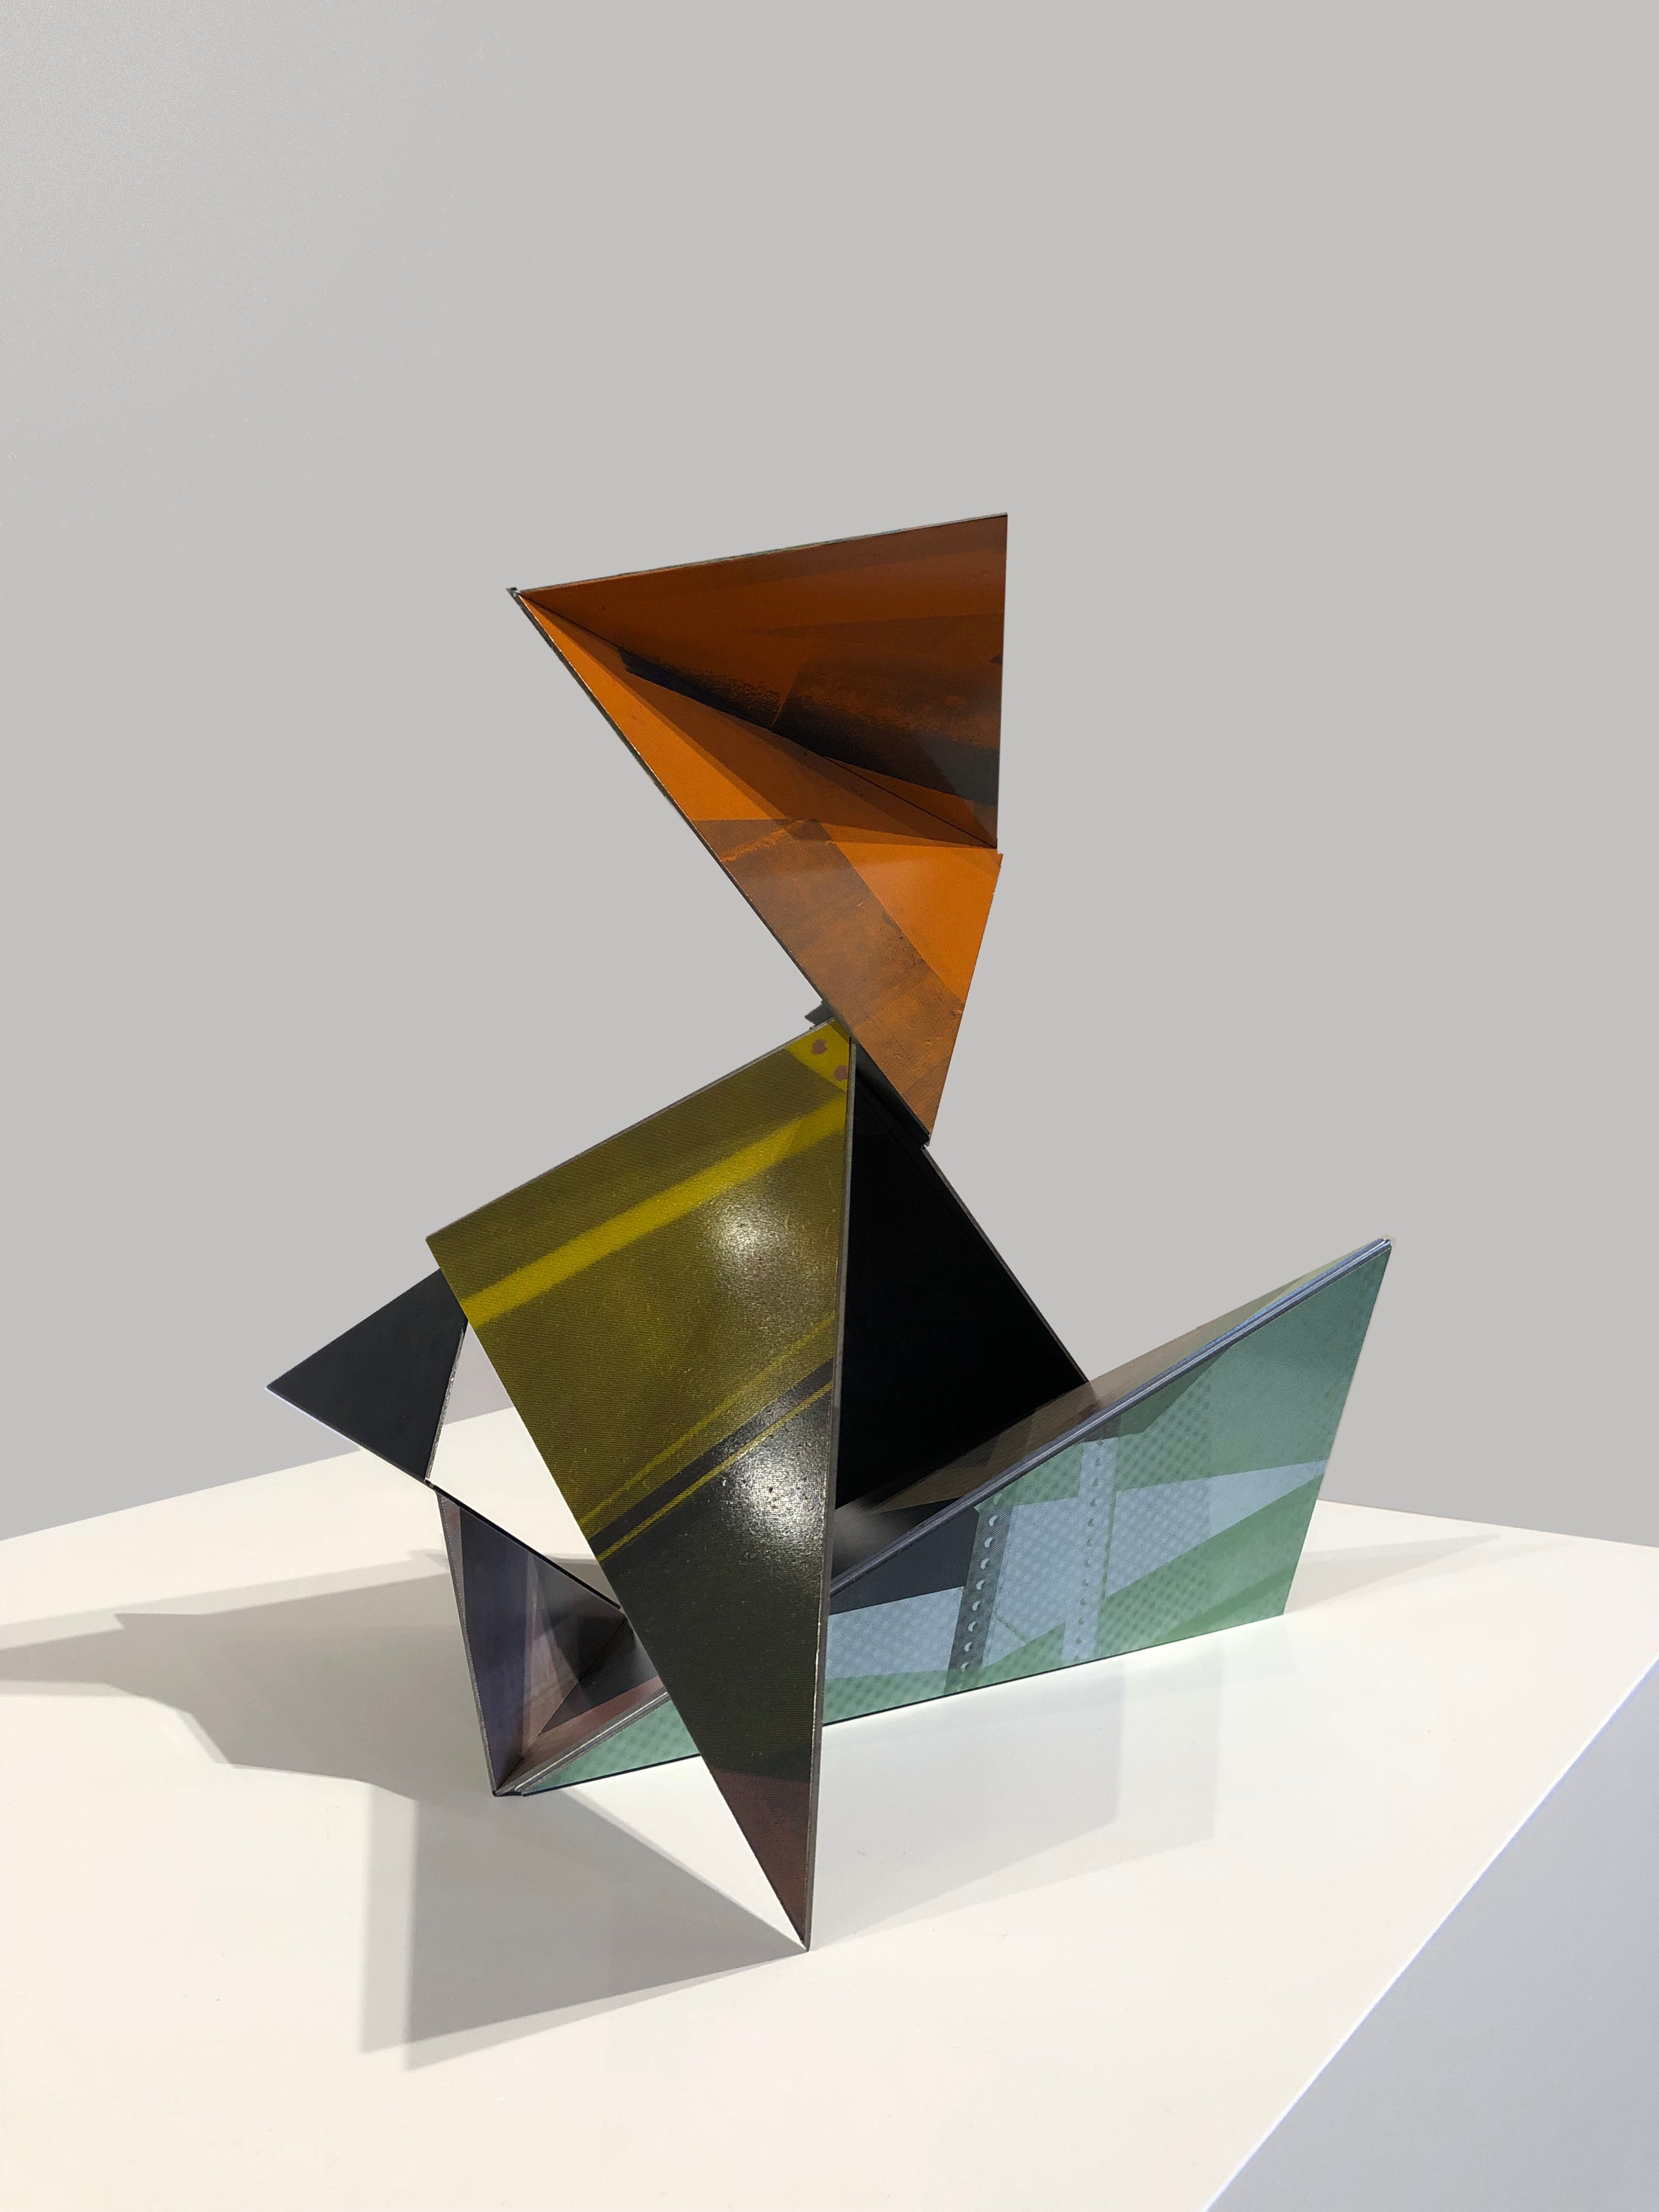 Natalie Christensen and Jim Eyre, Variant II, 2022, serigraphic transfer with acrylic paint on steel